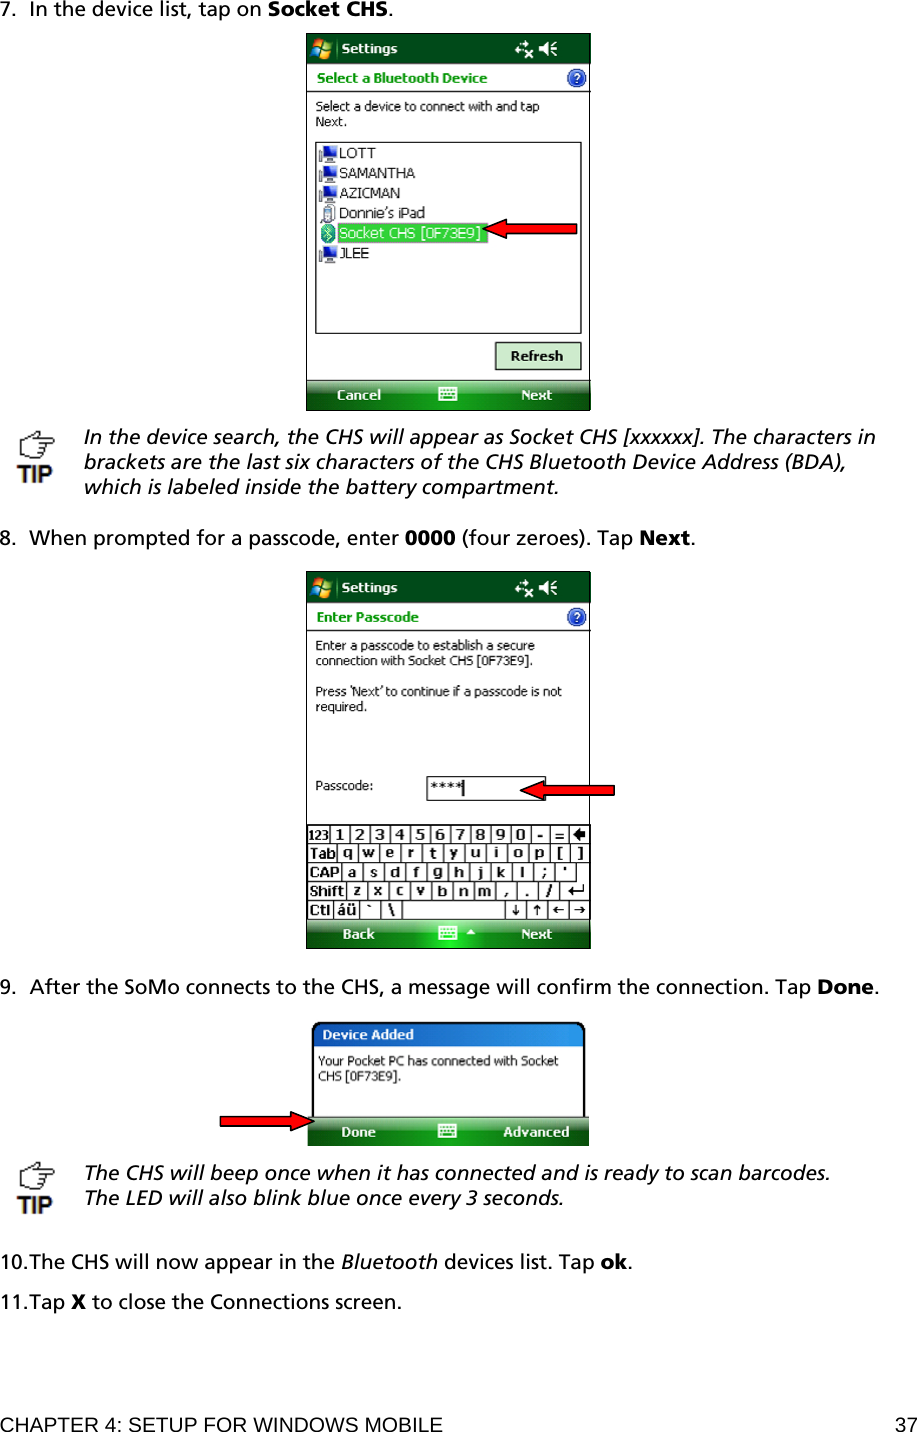 CHAPTER 4: SETUP FOR WINDOWS MOBILE  37 7. In the device list, tap on Socket CHS.    In the device search, the CHS will appear as Socket CHS [xxxxxx]. The characters in brackets are the last six characters of the CHS Bluetooth Device Address (BDA), which is labeled inside the battery compartment.  8. When prompted for a passcode, enter 0000 (four zeroes). Tap Next.    9. After the SoMo connects to the CHS, a message will confirm the connection. Tap Done.    The CHS will beep once when it has connected and is ready to scan barcodes. The LED will also blink blue once every 3 seconds.   10. The CHS will now appear in the Bluetooth devices list. Tap ok.  11. Tap X to close the Connections screen. 